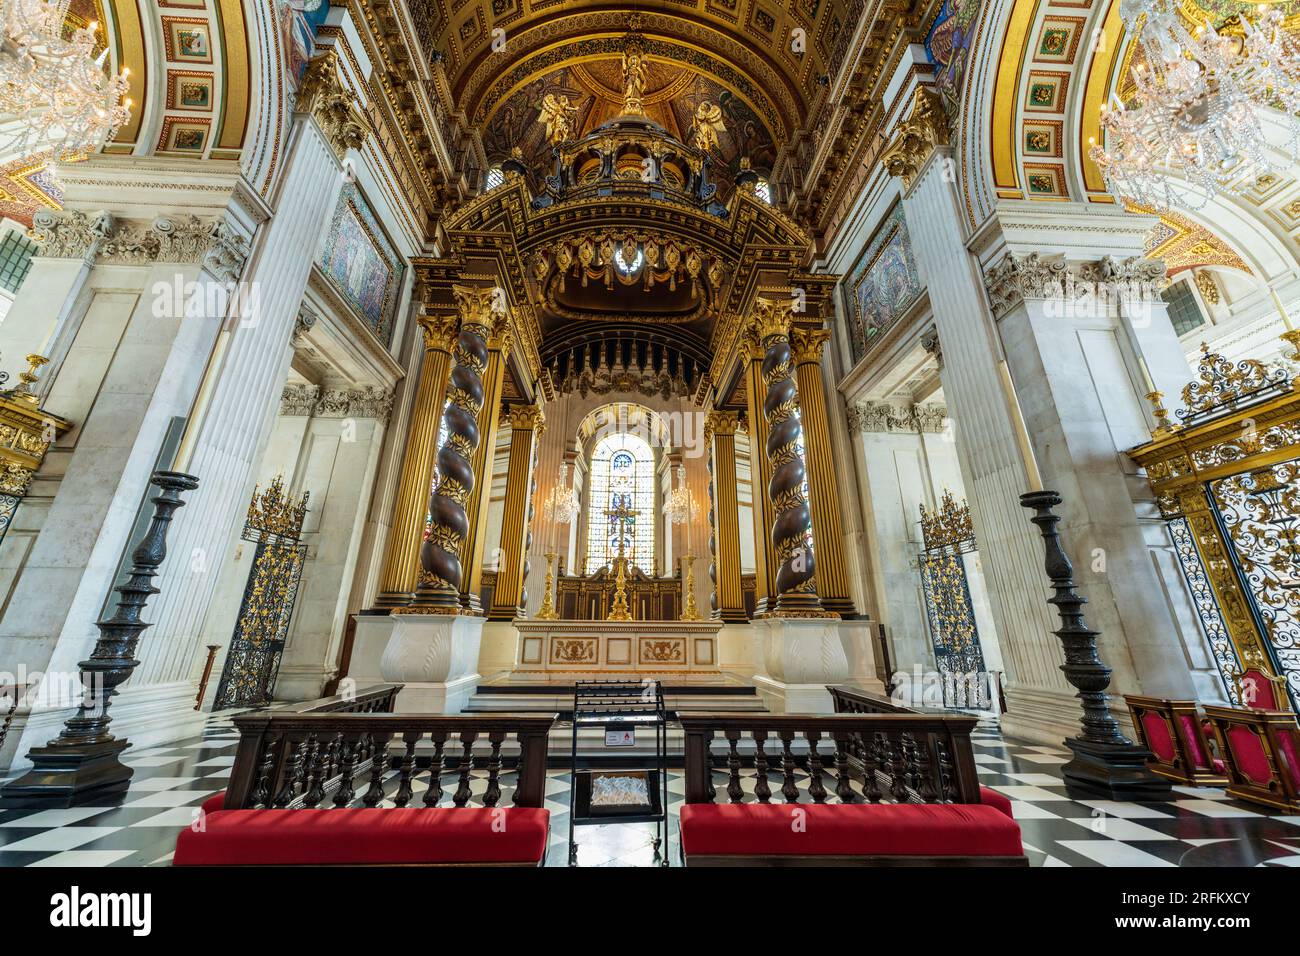 London, England, UK - July 25, 2022. St Paul's Cathedral interior of the altar. St Pauls Cathedral is best known for its famous dome, historical past. Stock Photo